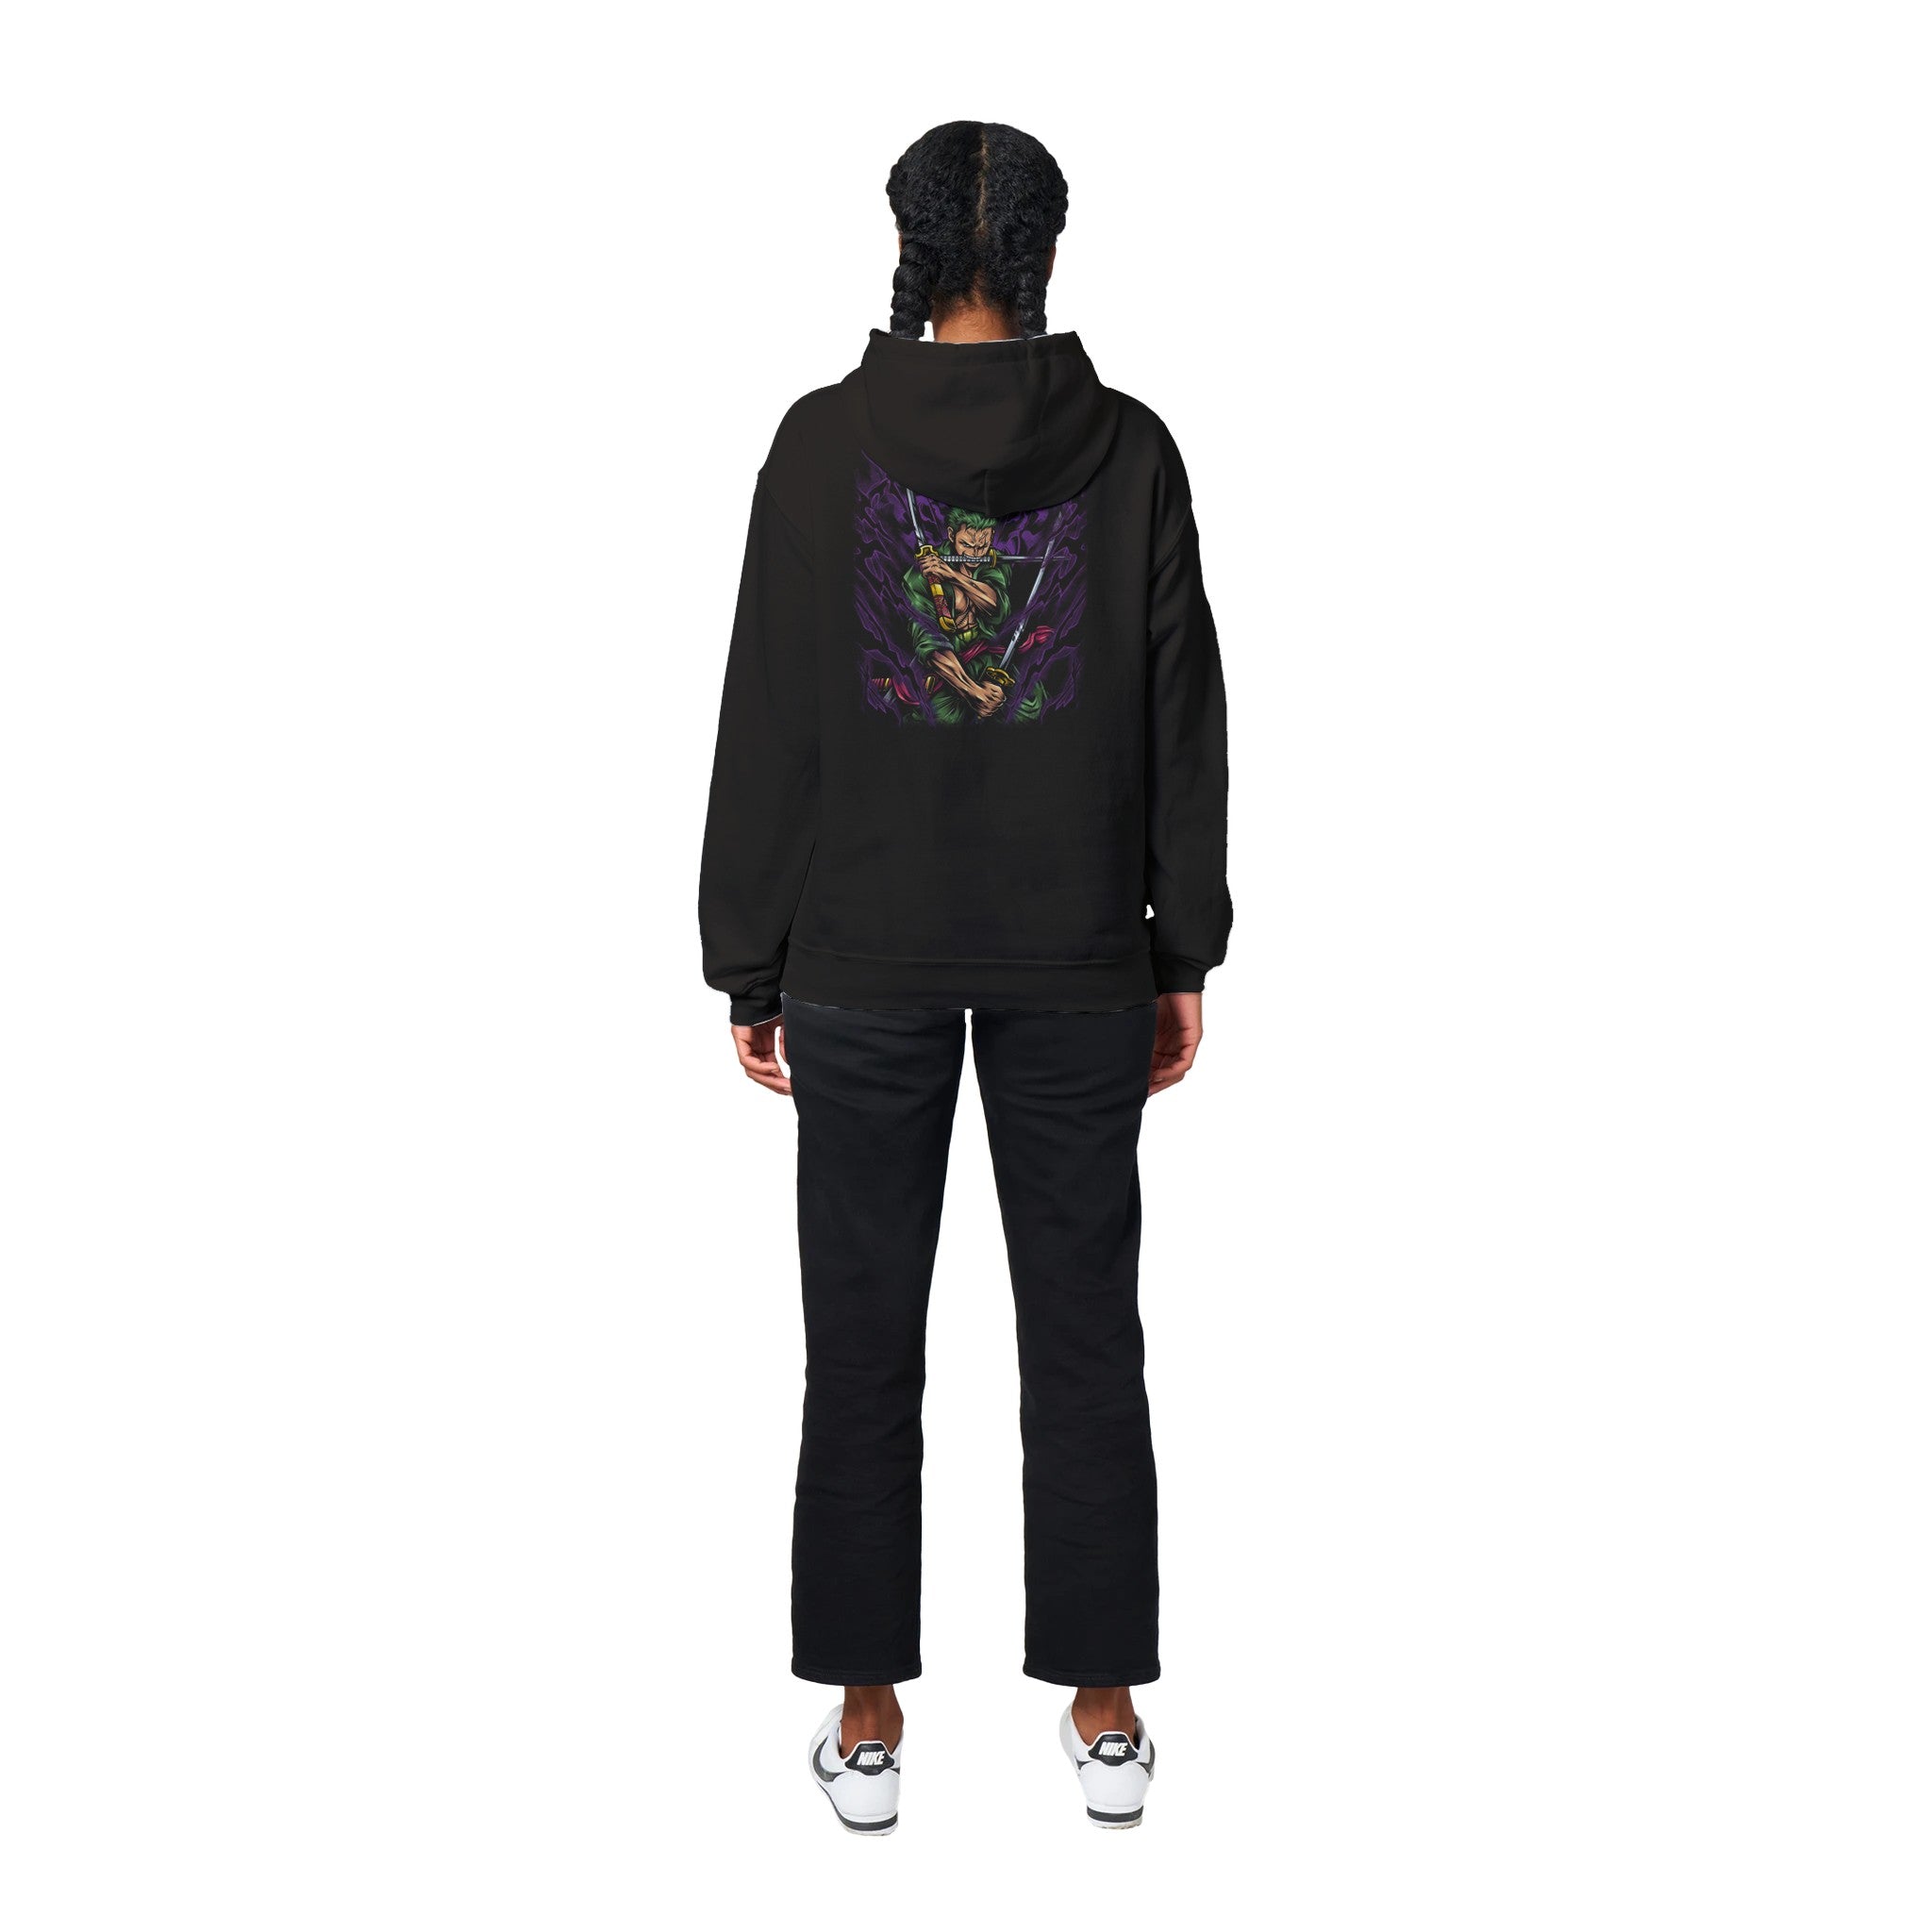 shop and buy One Piece Zoro anime clothing hoodie